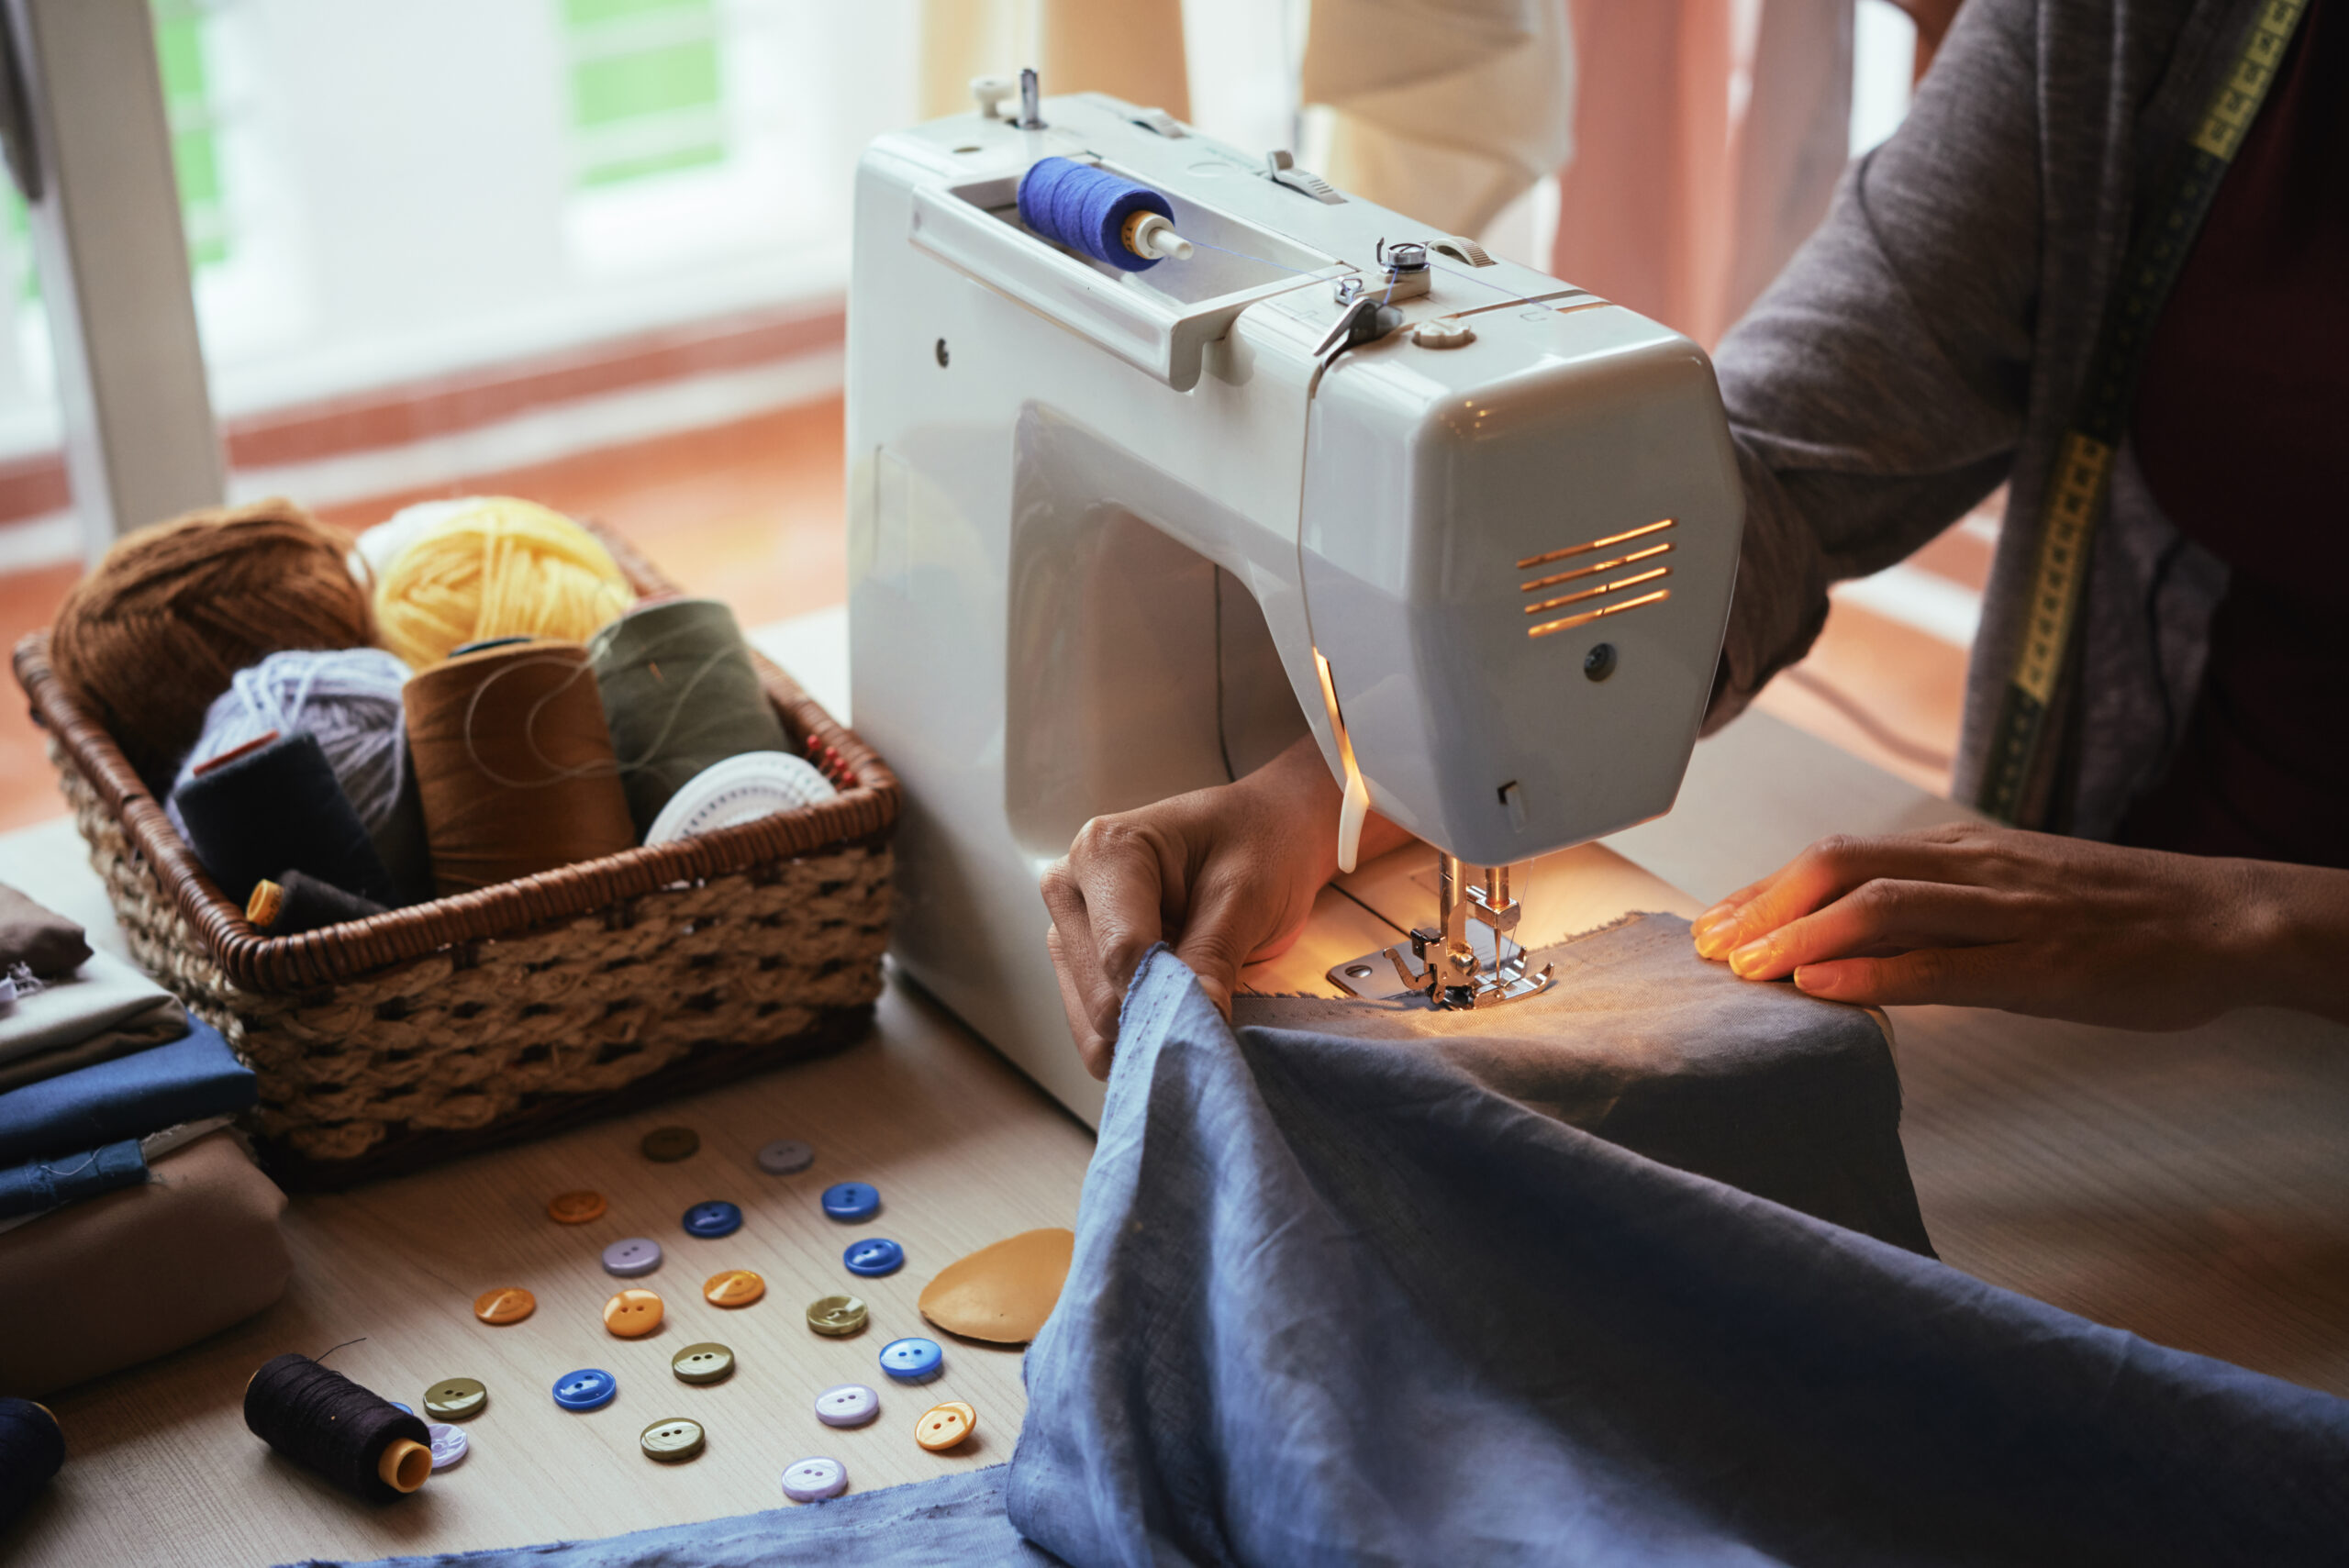 This handheld sewing machine changes thread color to match fabric